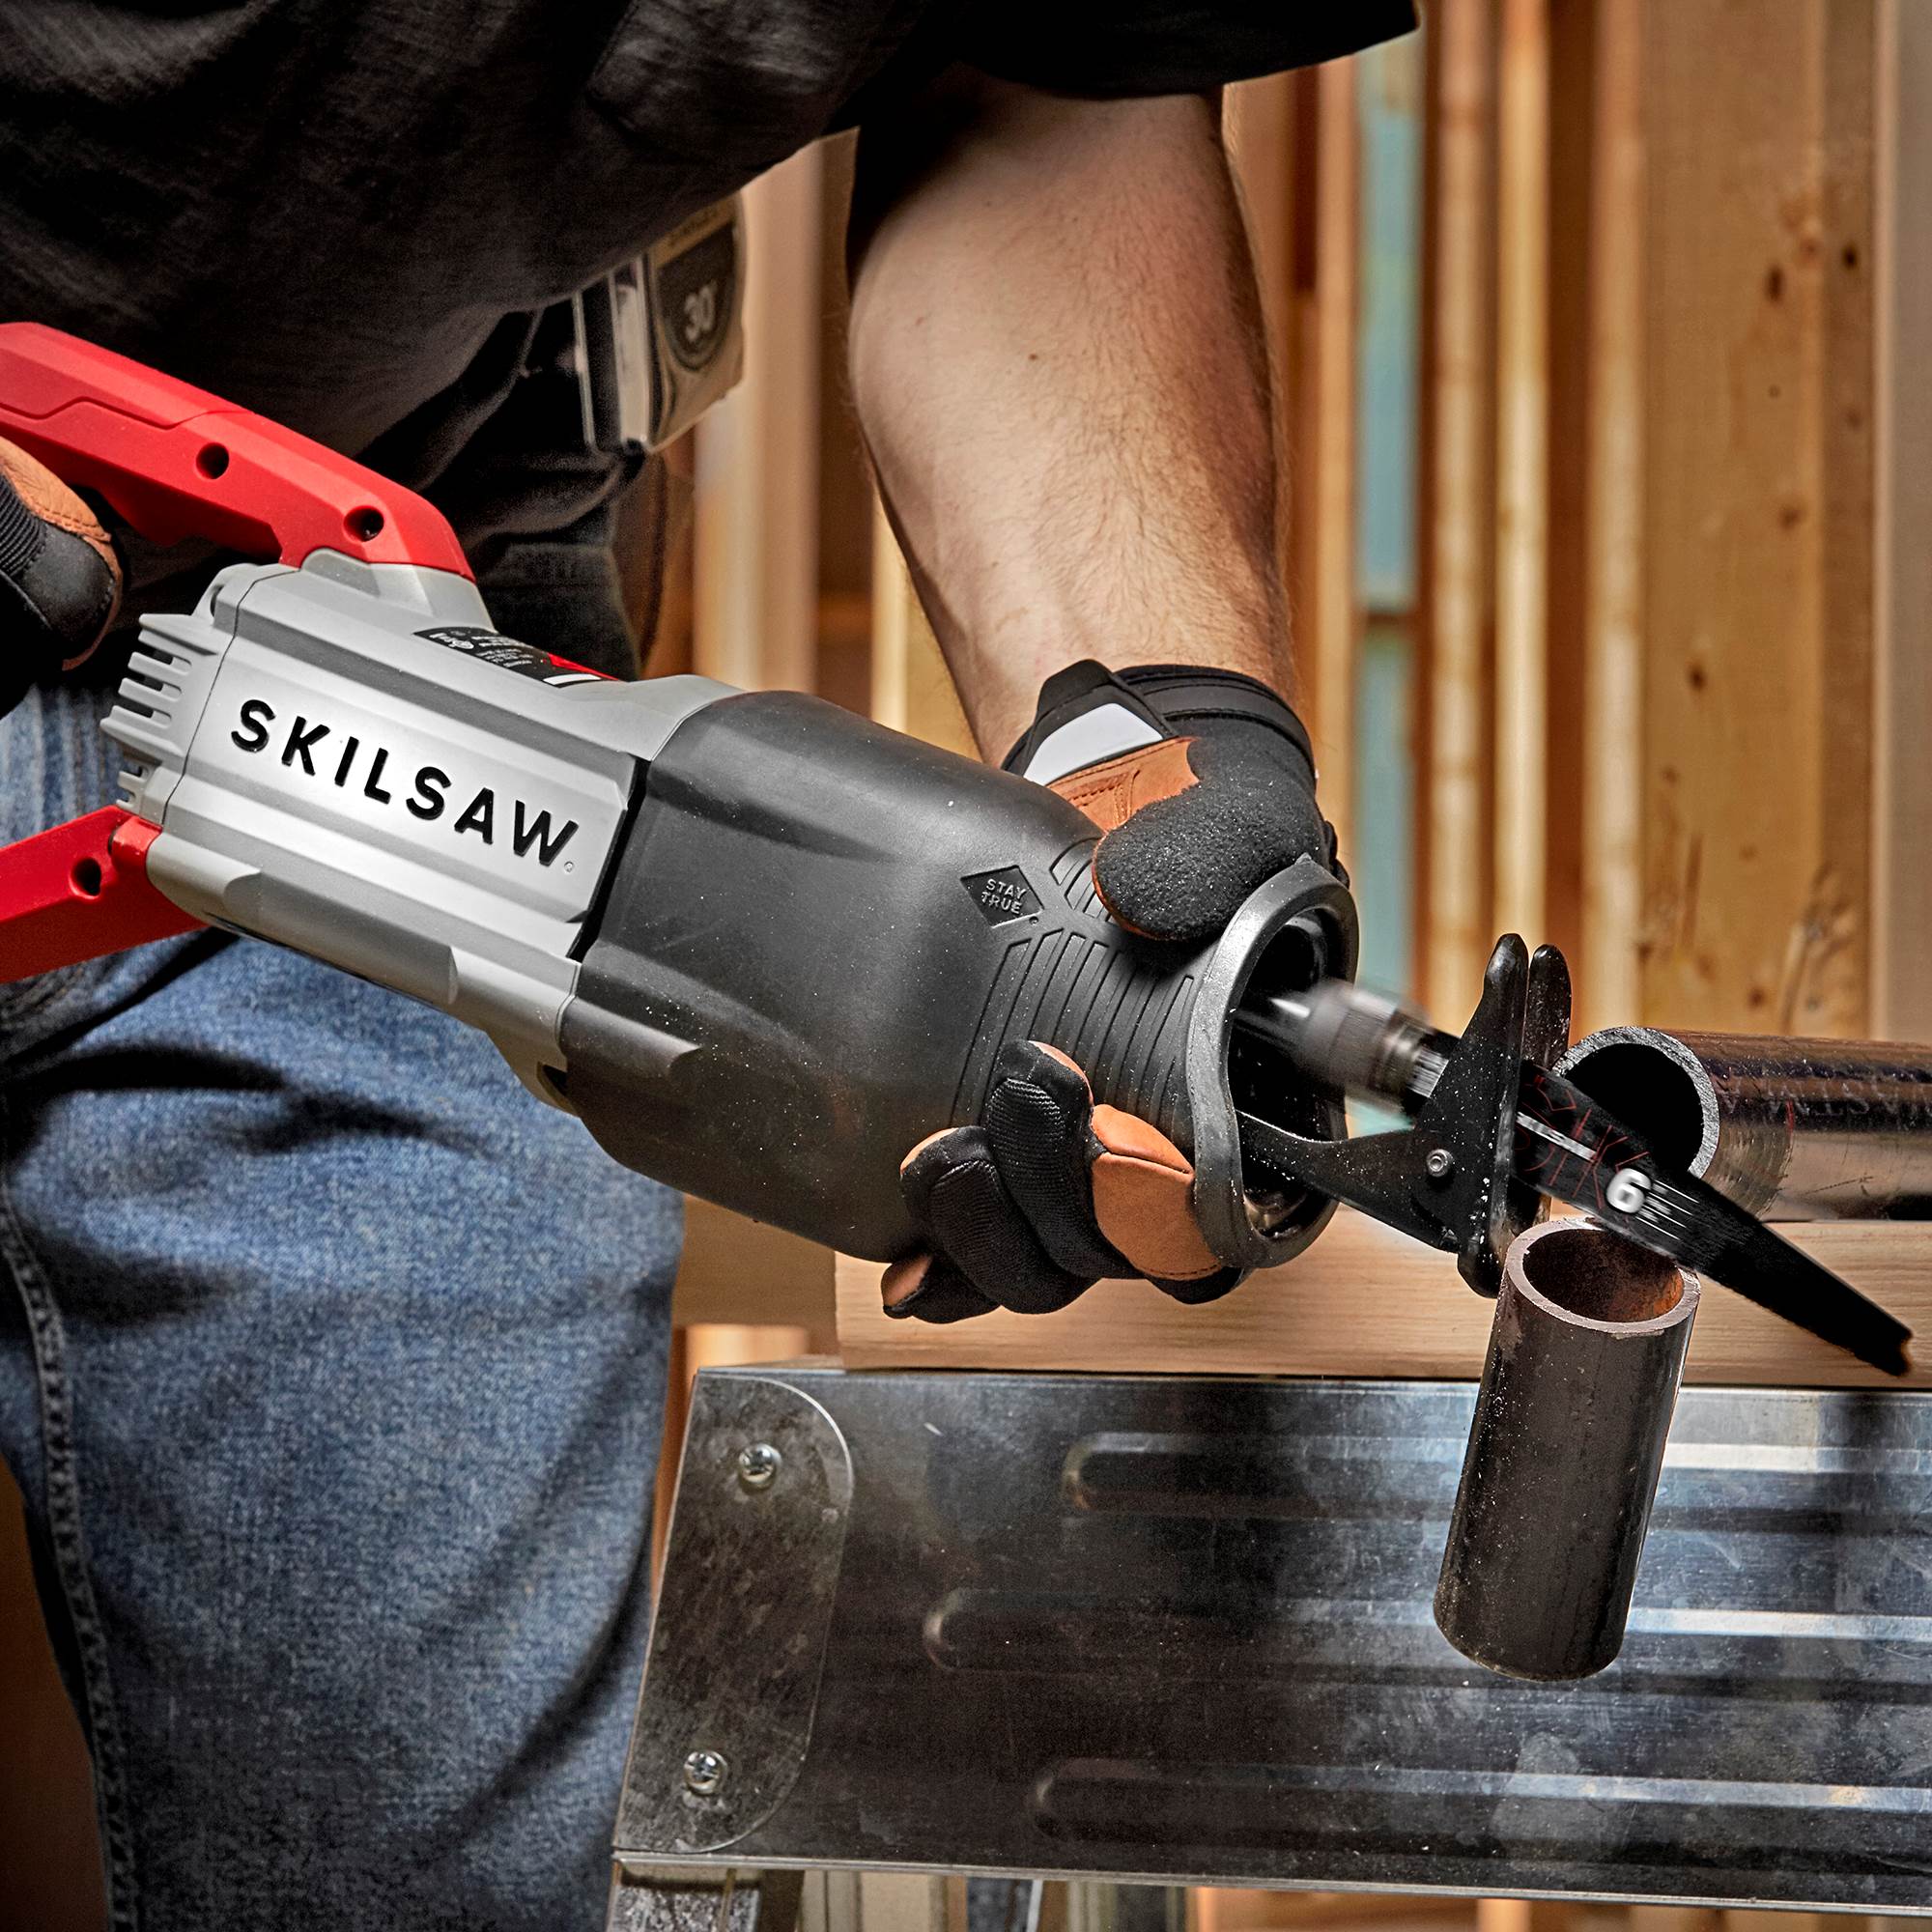 SKILSAW 13-Amp Reciprocating Saw with Buzzkill Technology, SPT44A-00 - image 5 of 8